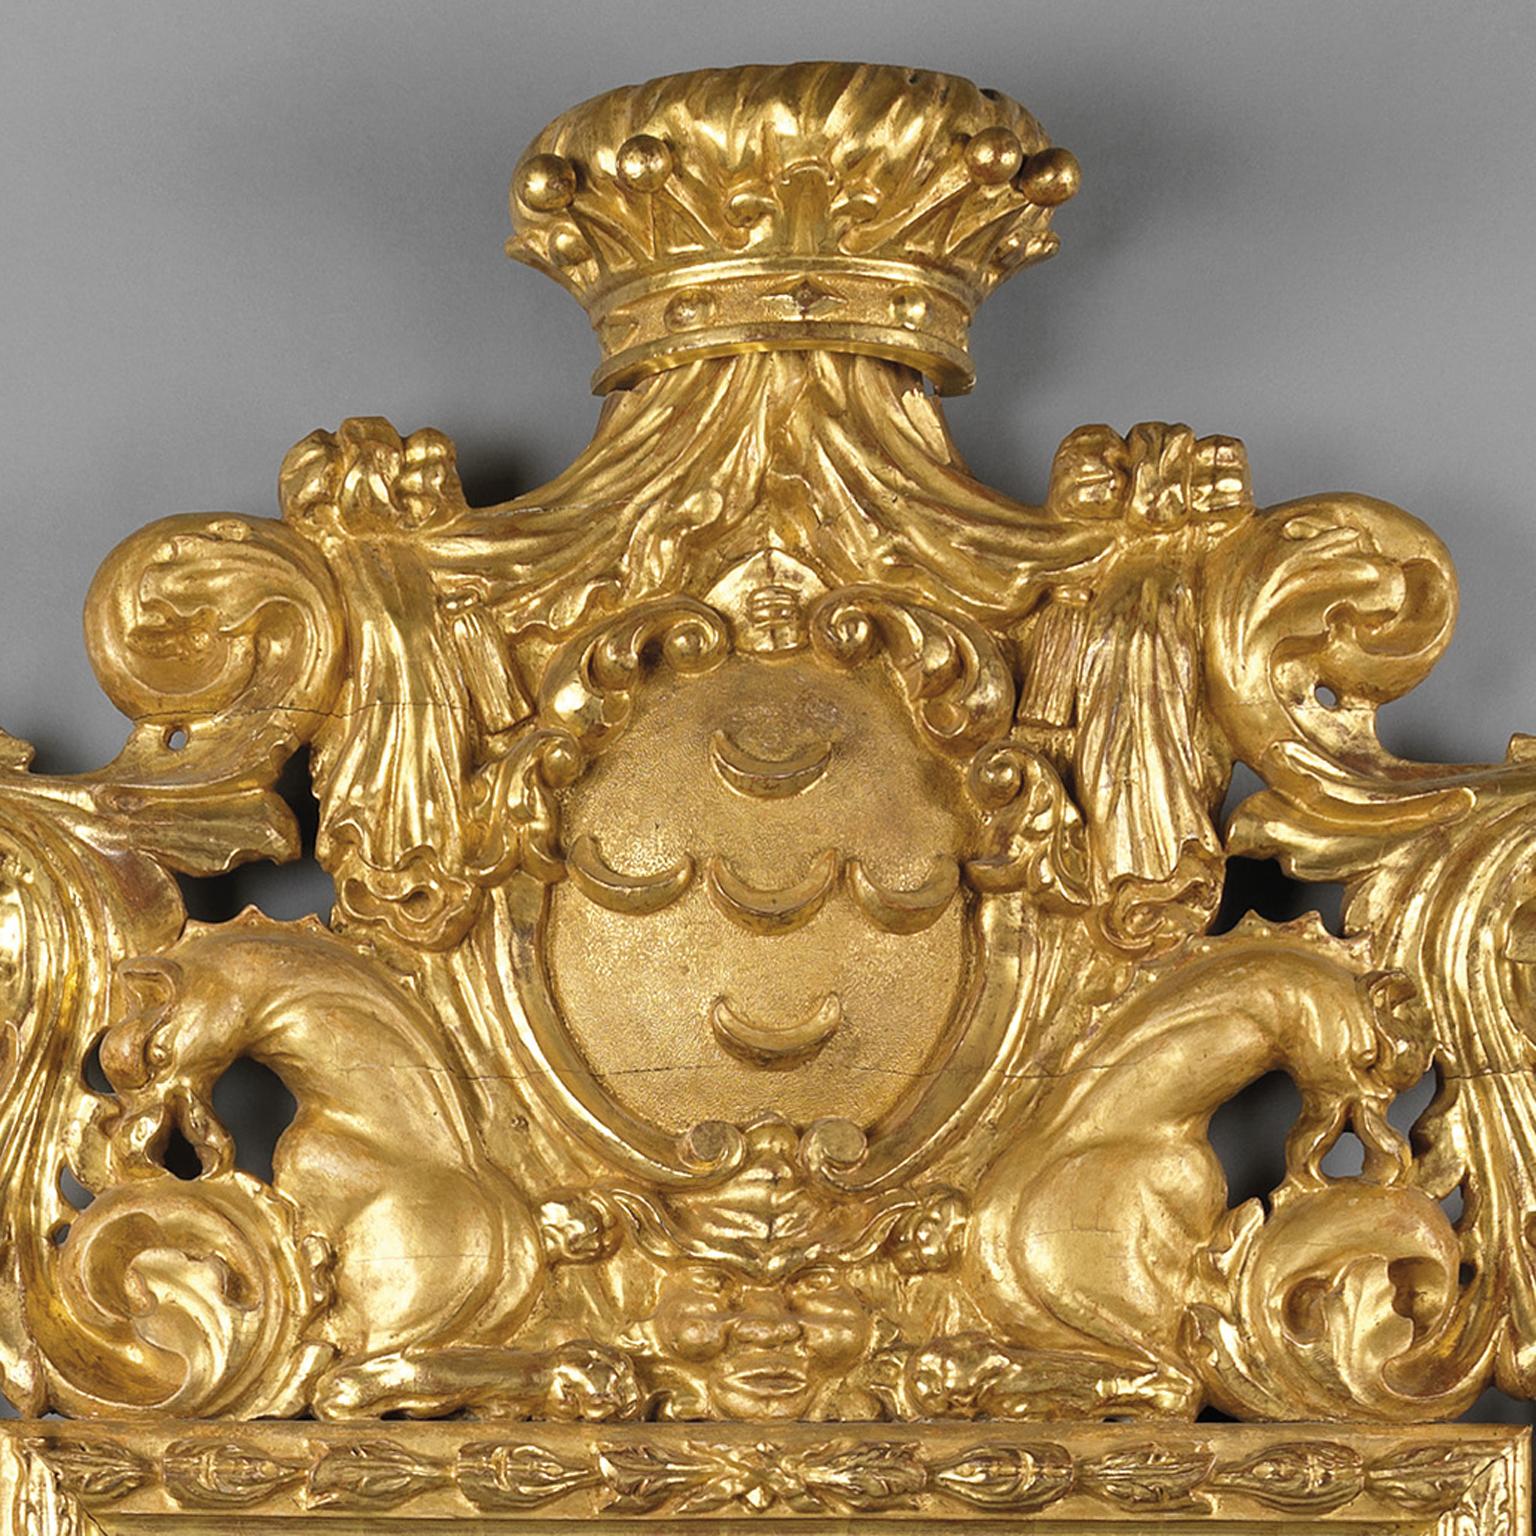 A large and impressive Baroque style carved giltwood mirror, the rectangular mirror plate beneath a crest composed of a crown and a moon crescented cartouche flanked by stylised beasts and an acanthus leaf garland frame.

Italian, Circa 1870.